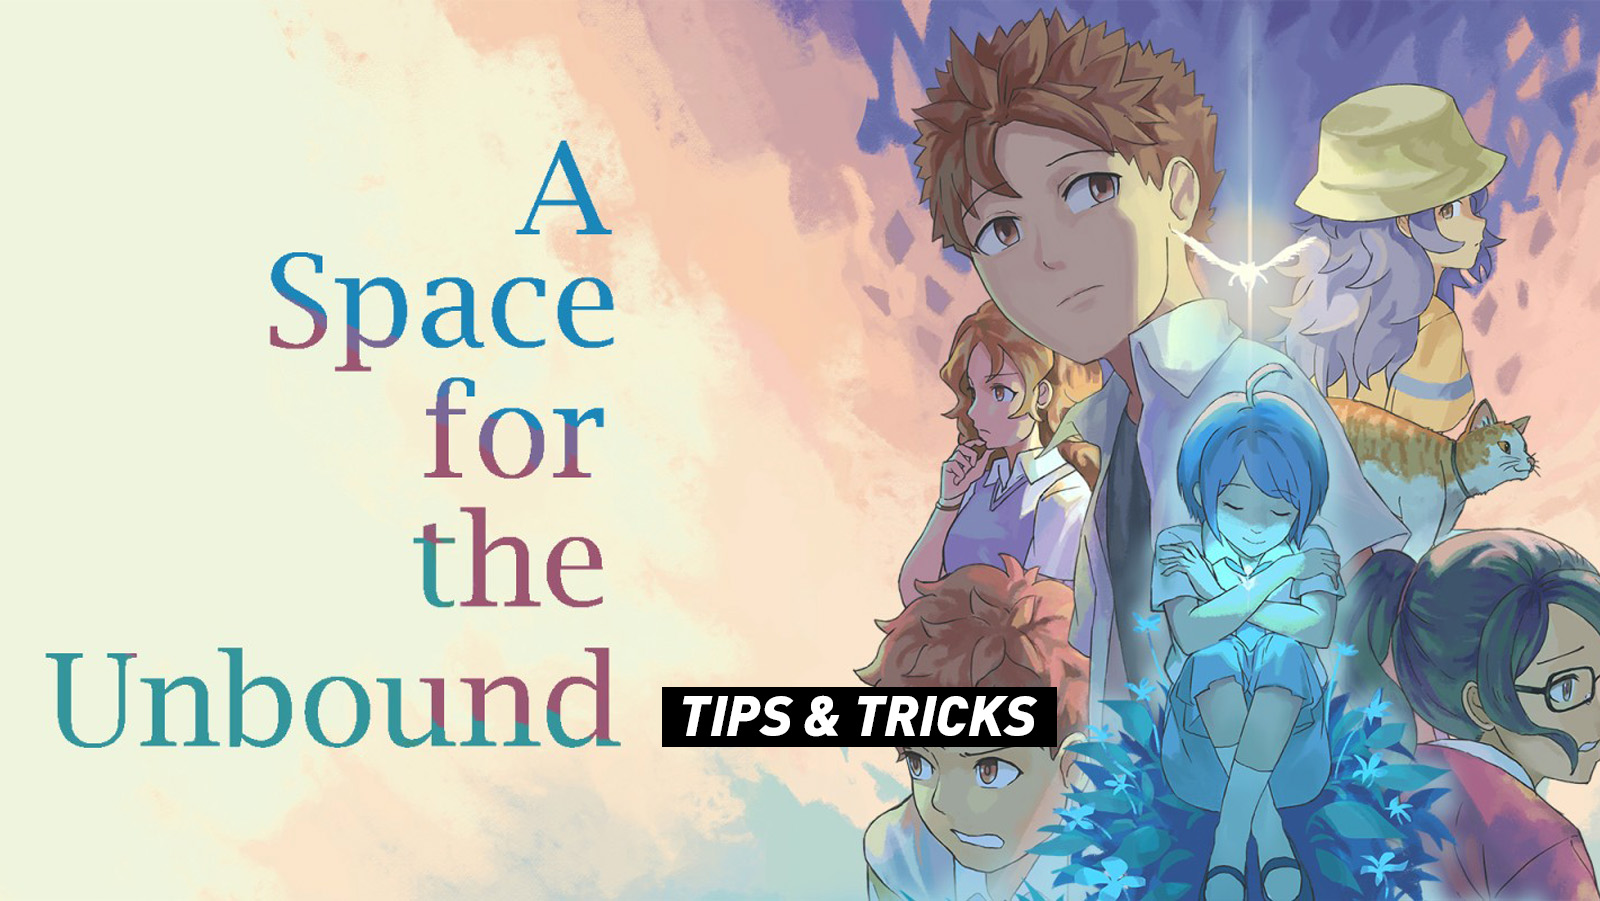 A Space for The Unbound Tips